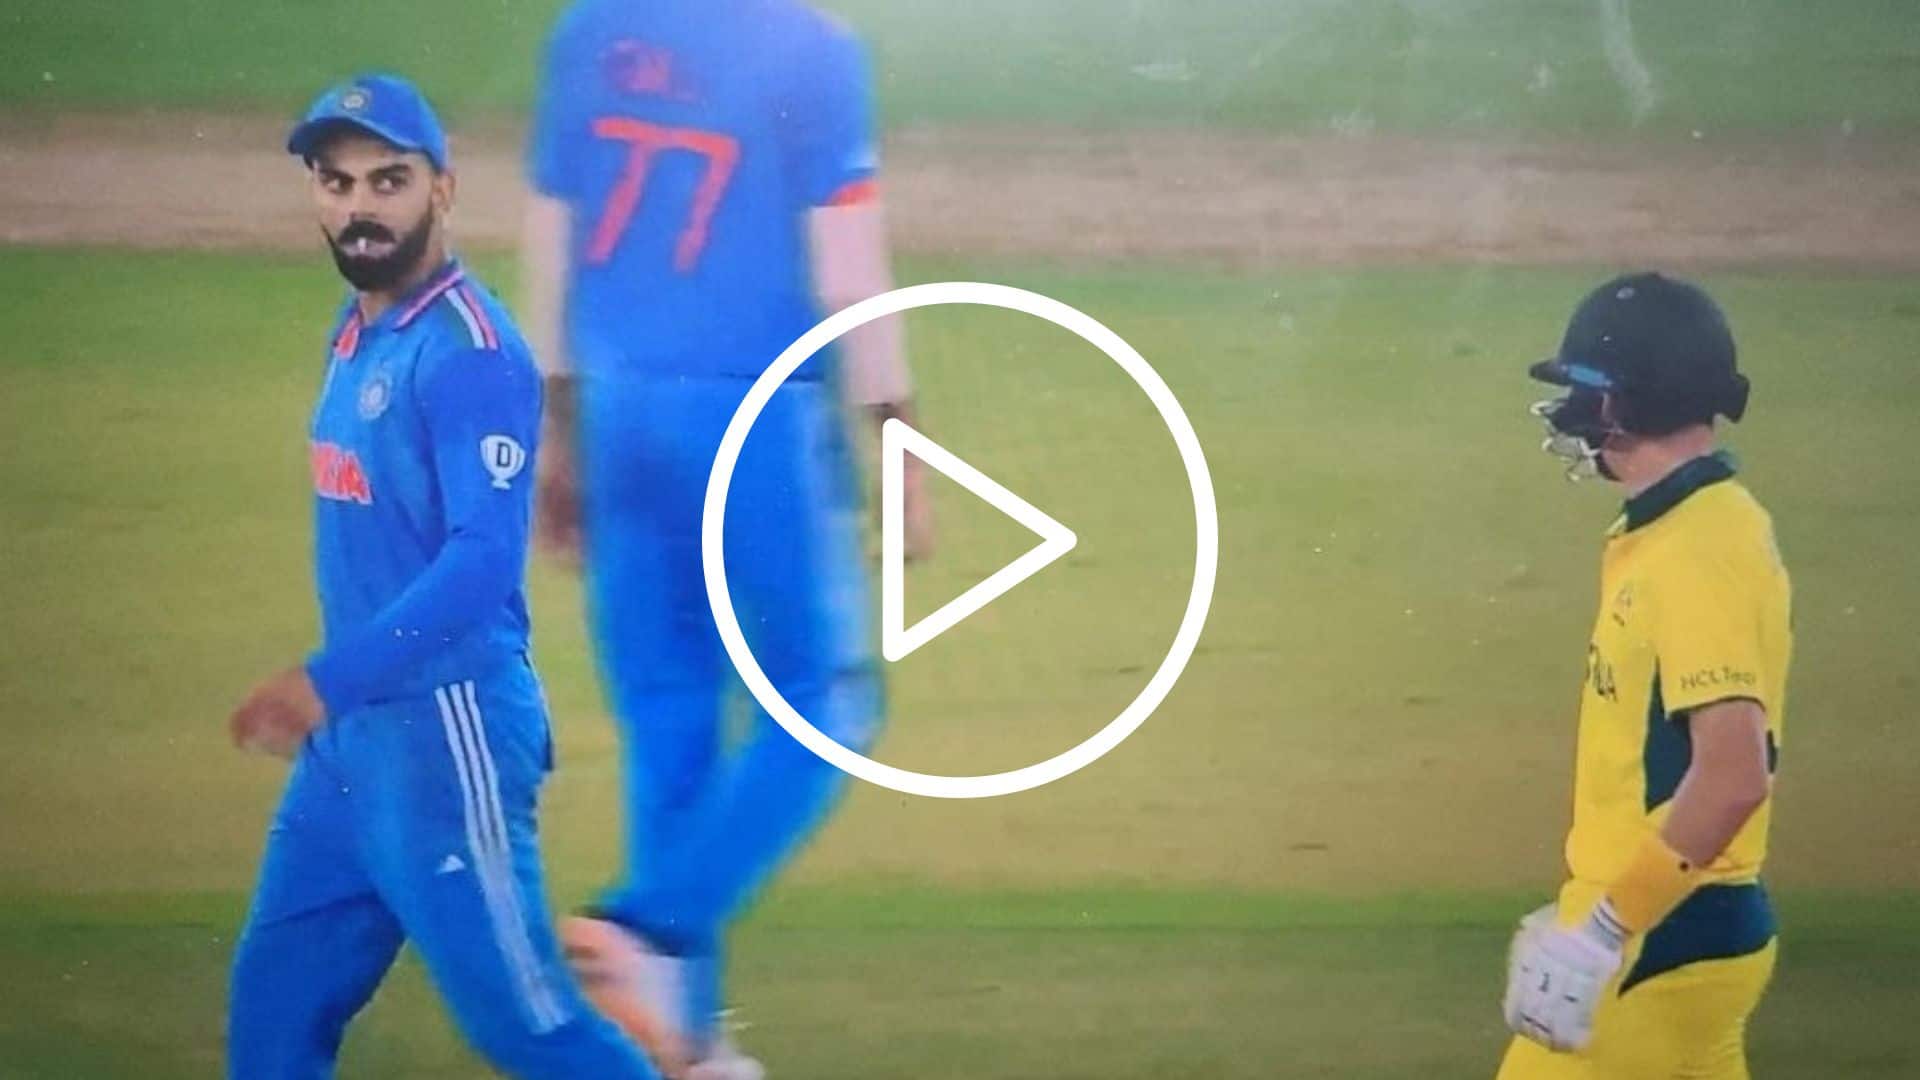 [Watch] Virat Kohli Gives ‘Death Stare’ At Labuschagne As World Cup Final Gets Heated Up